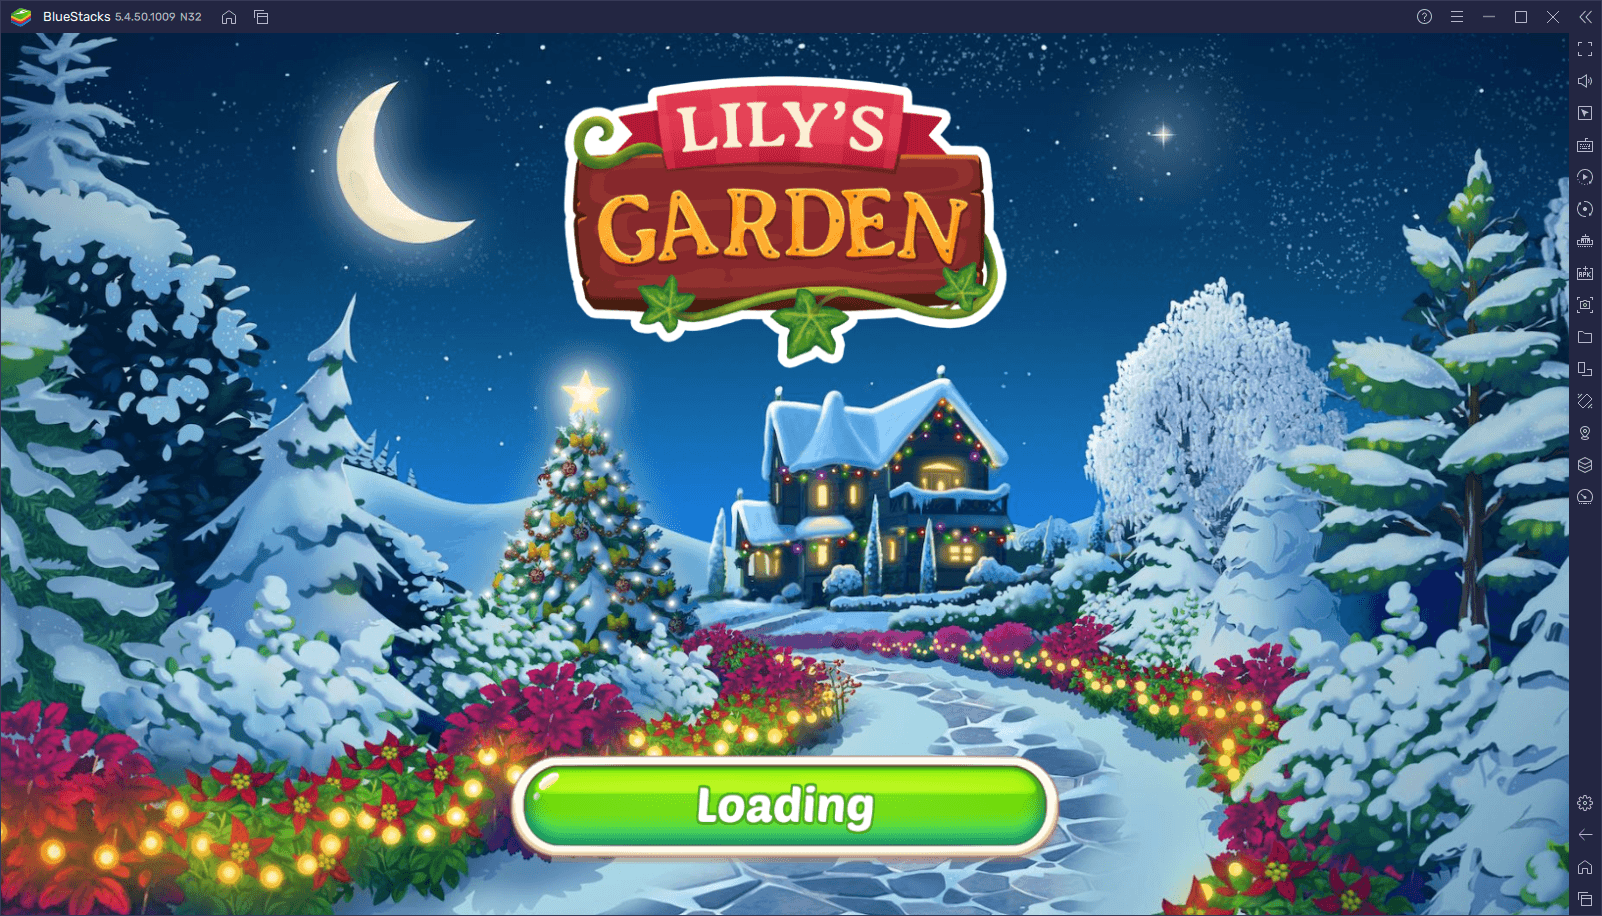 Lily’s Garden on PC - The Best BlueStacks Tools for Enhancing Your Gameplay Experience